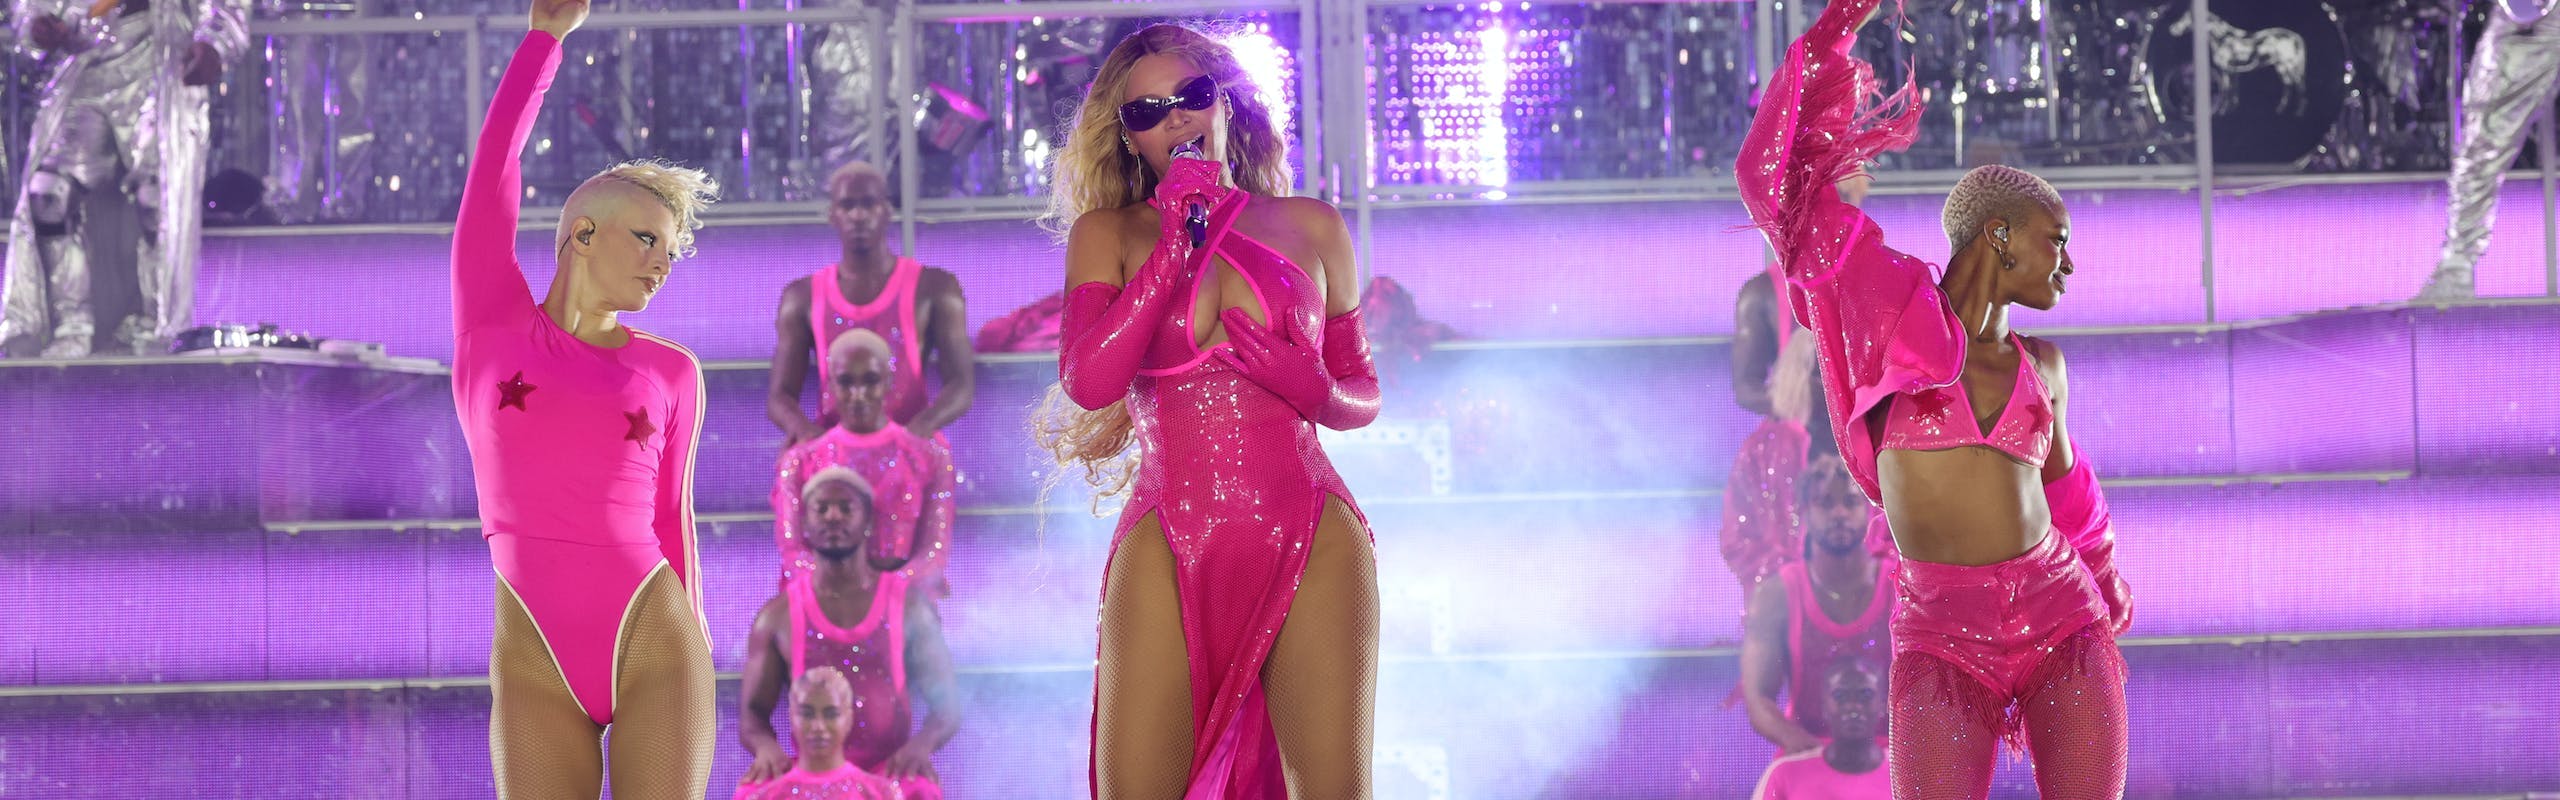 Beyonce performing in a pink dress with side slits.